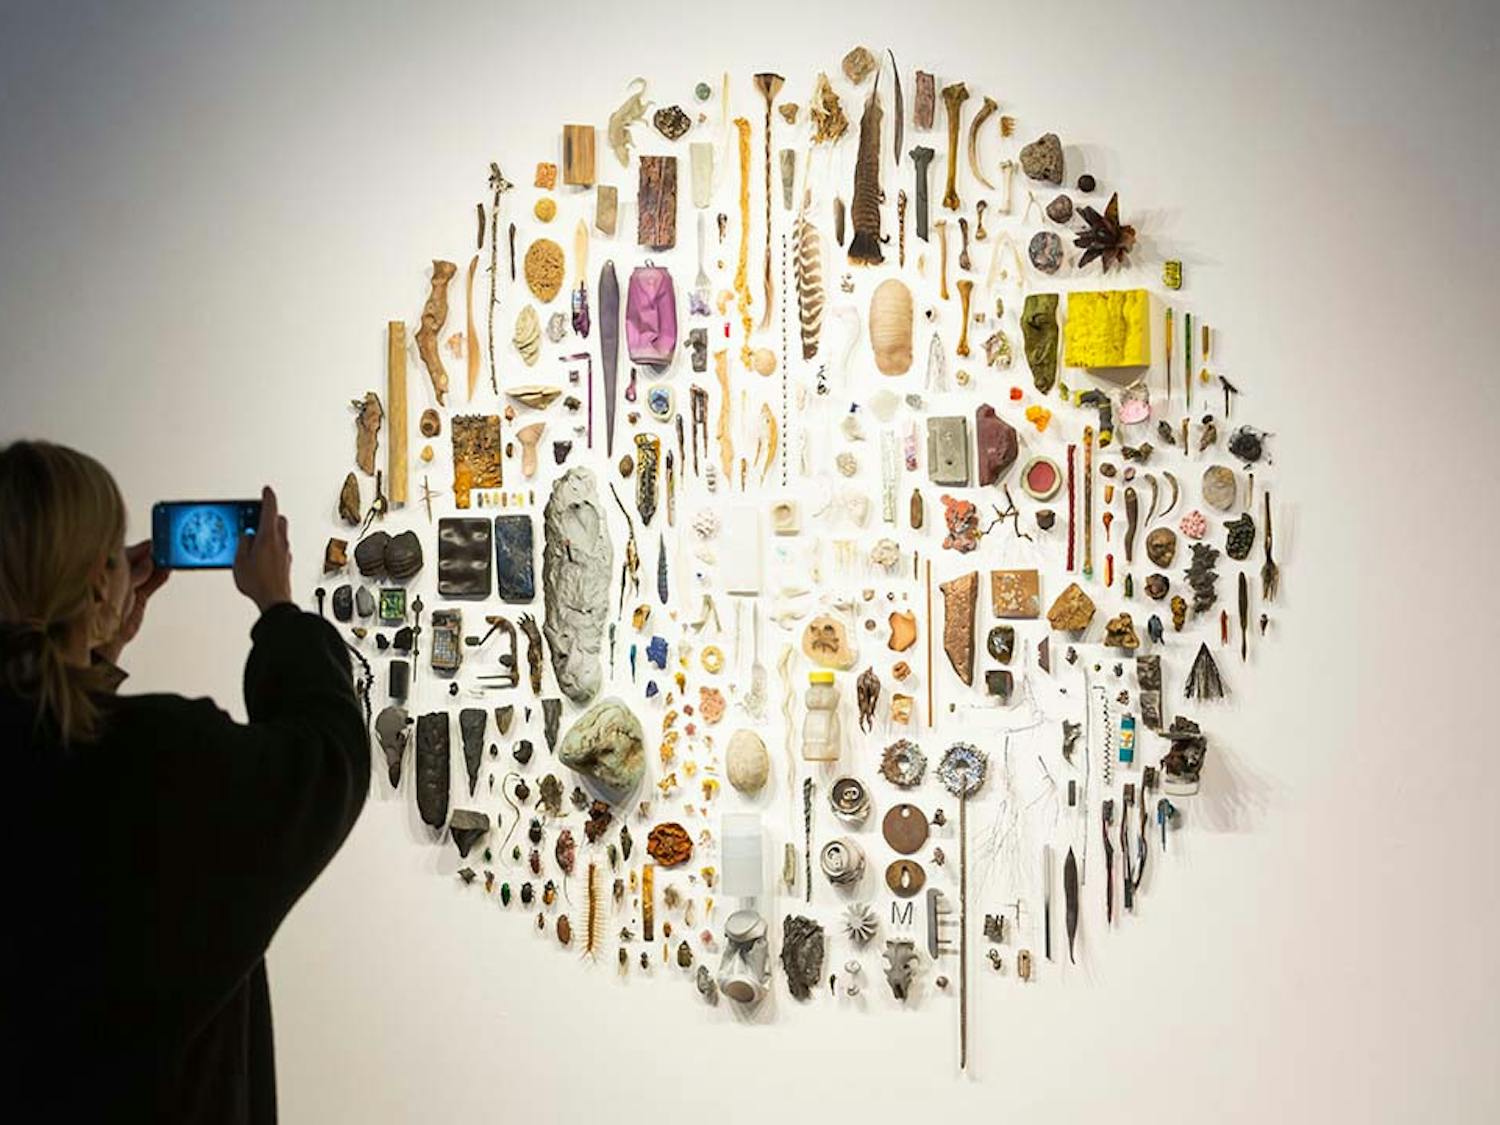 A visitor takes a photo of "Some Things" by Christopher Mahonski in the Voyage of Life exhibit featured in the McMaster Gallery. The sculpture is a collection of found and fabricated materials to explore the subject of ecological uncertainty.